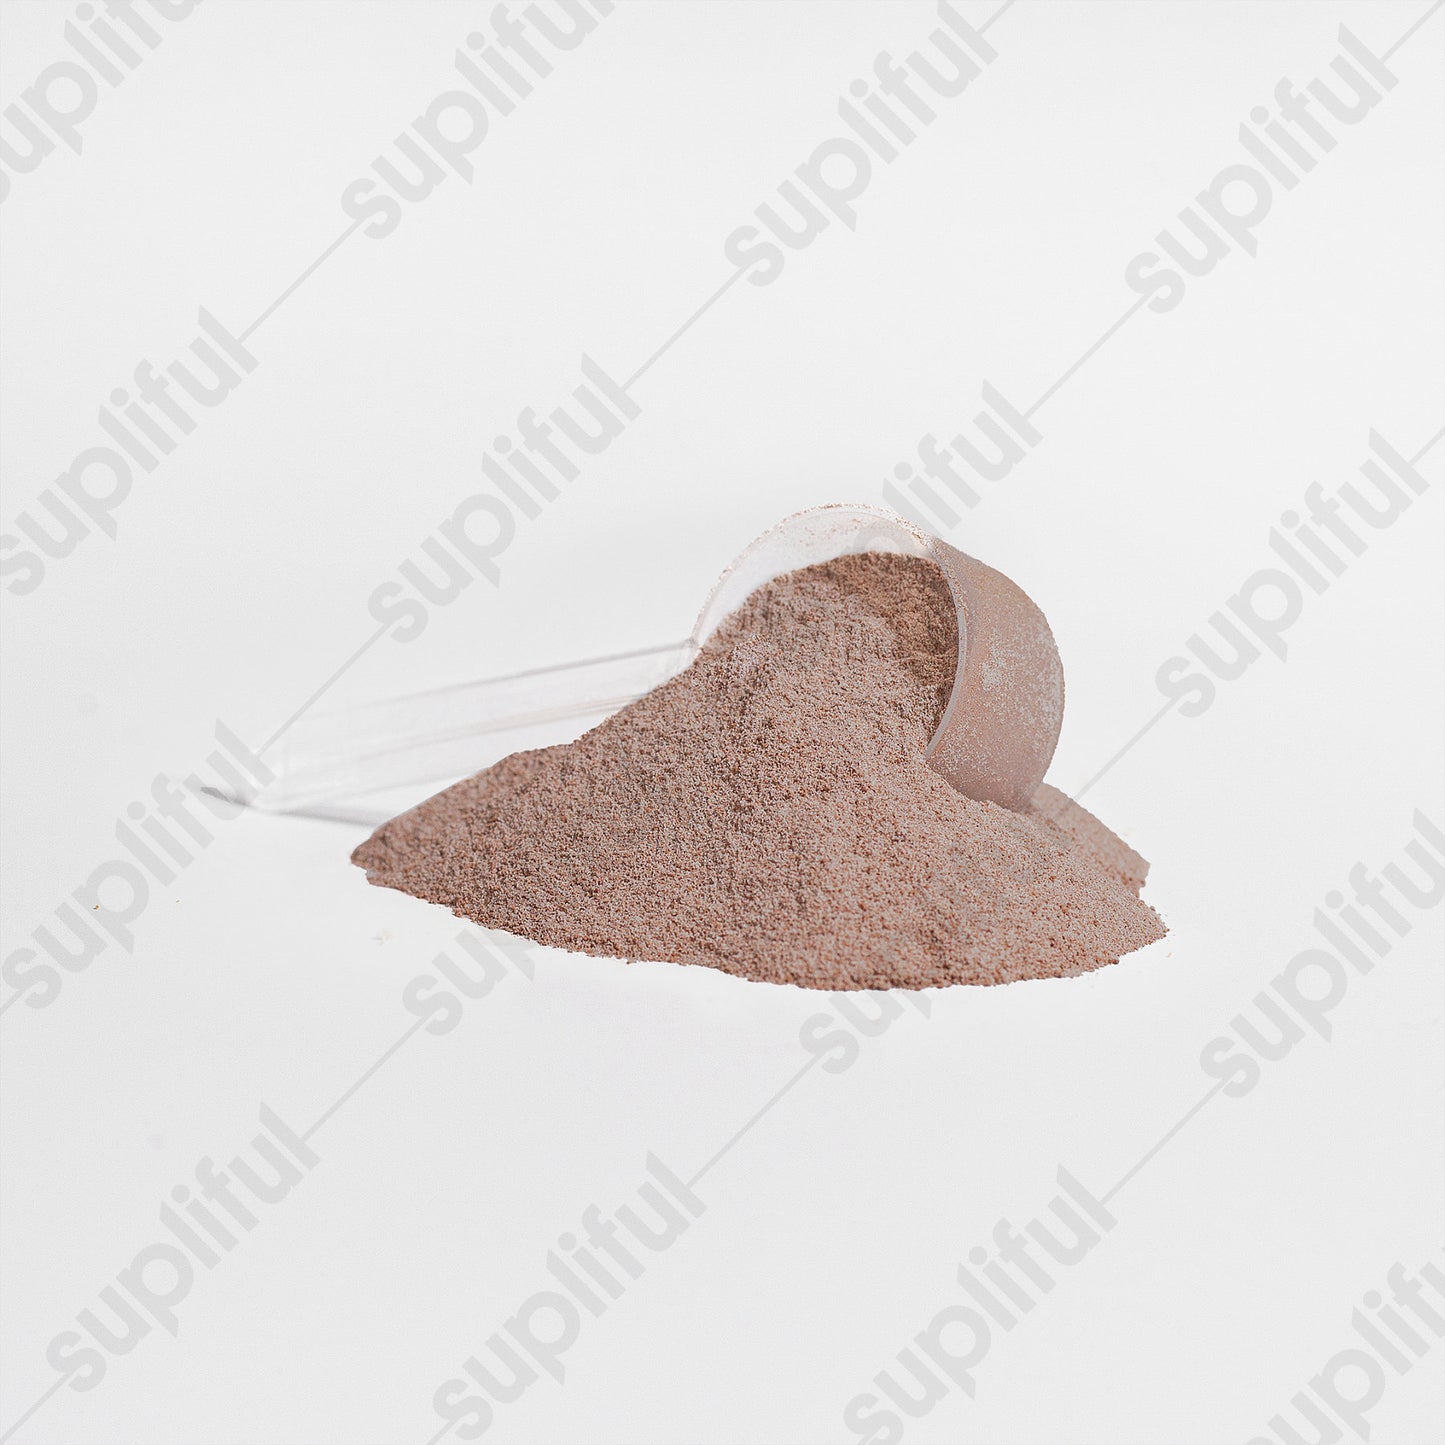 Essential Whey Protein (Chocolate Flavour)